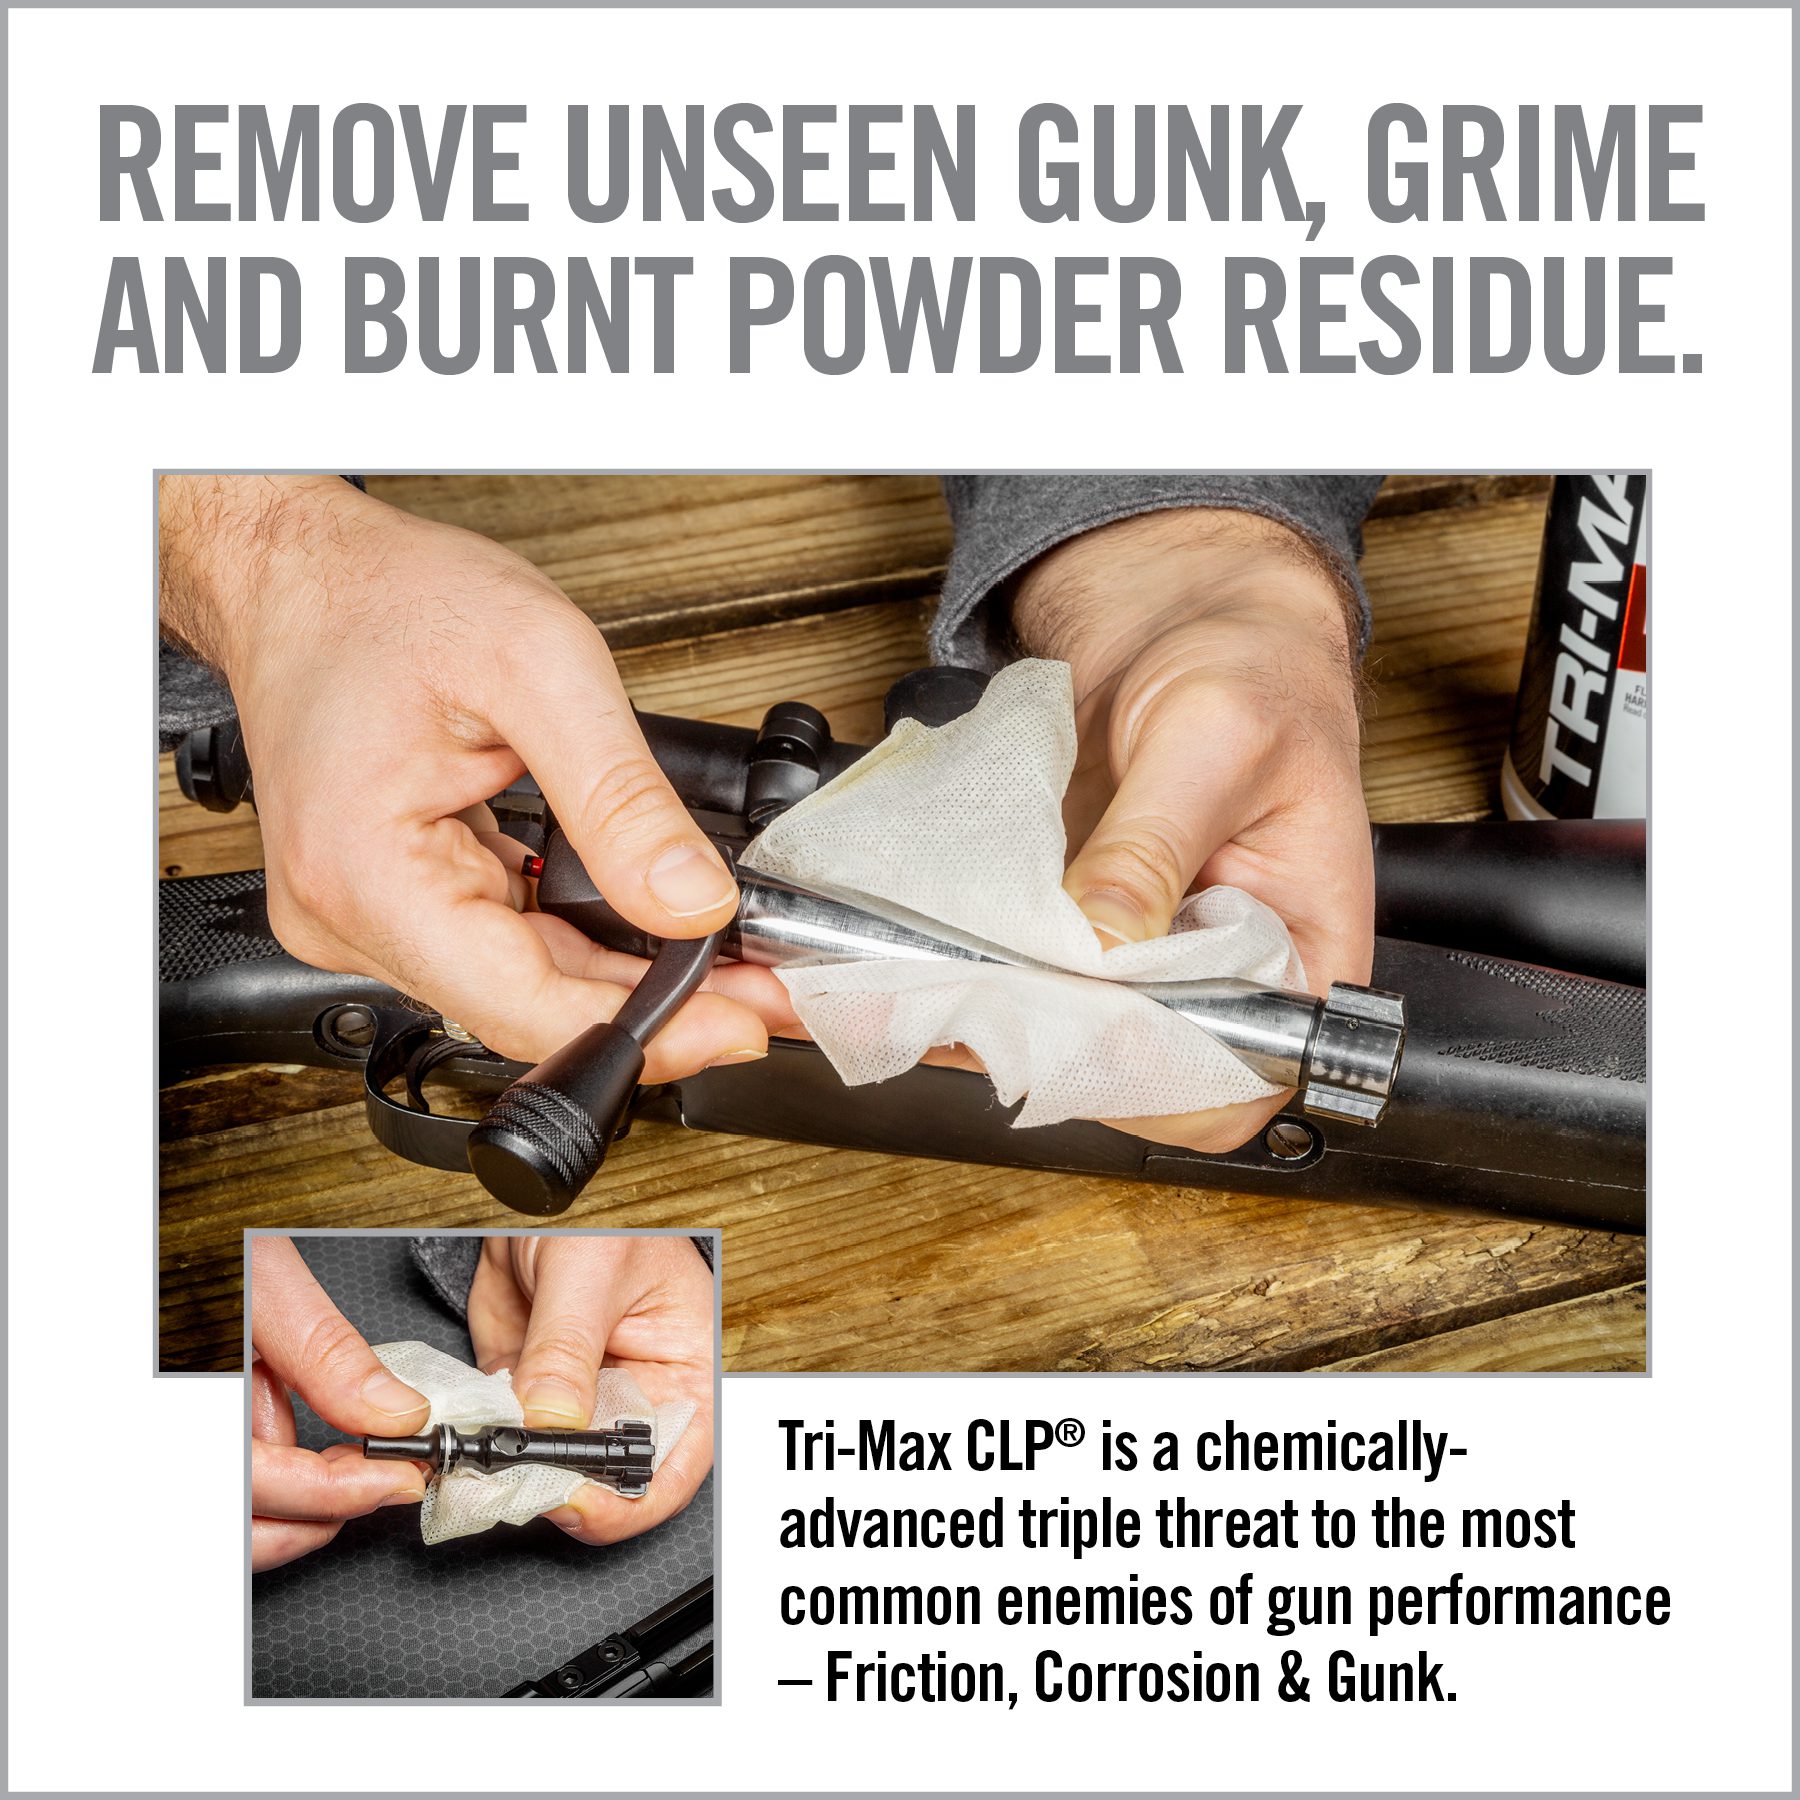 a poster with instructions on how to remove unseen gunk, grime and burnt powderer residue